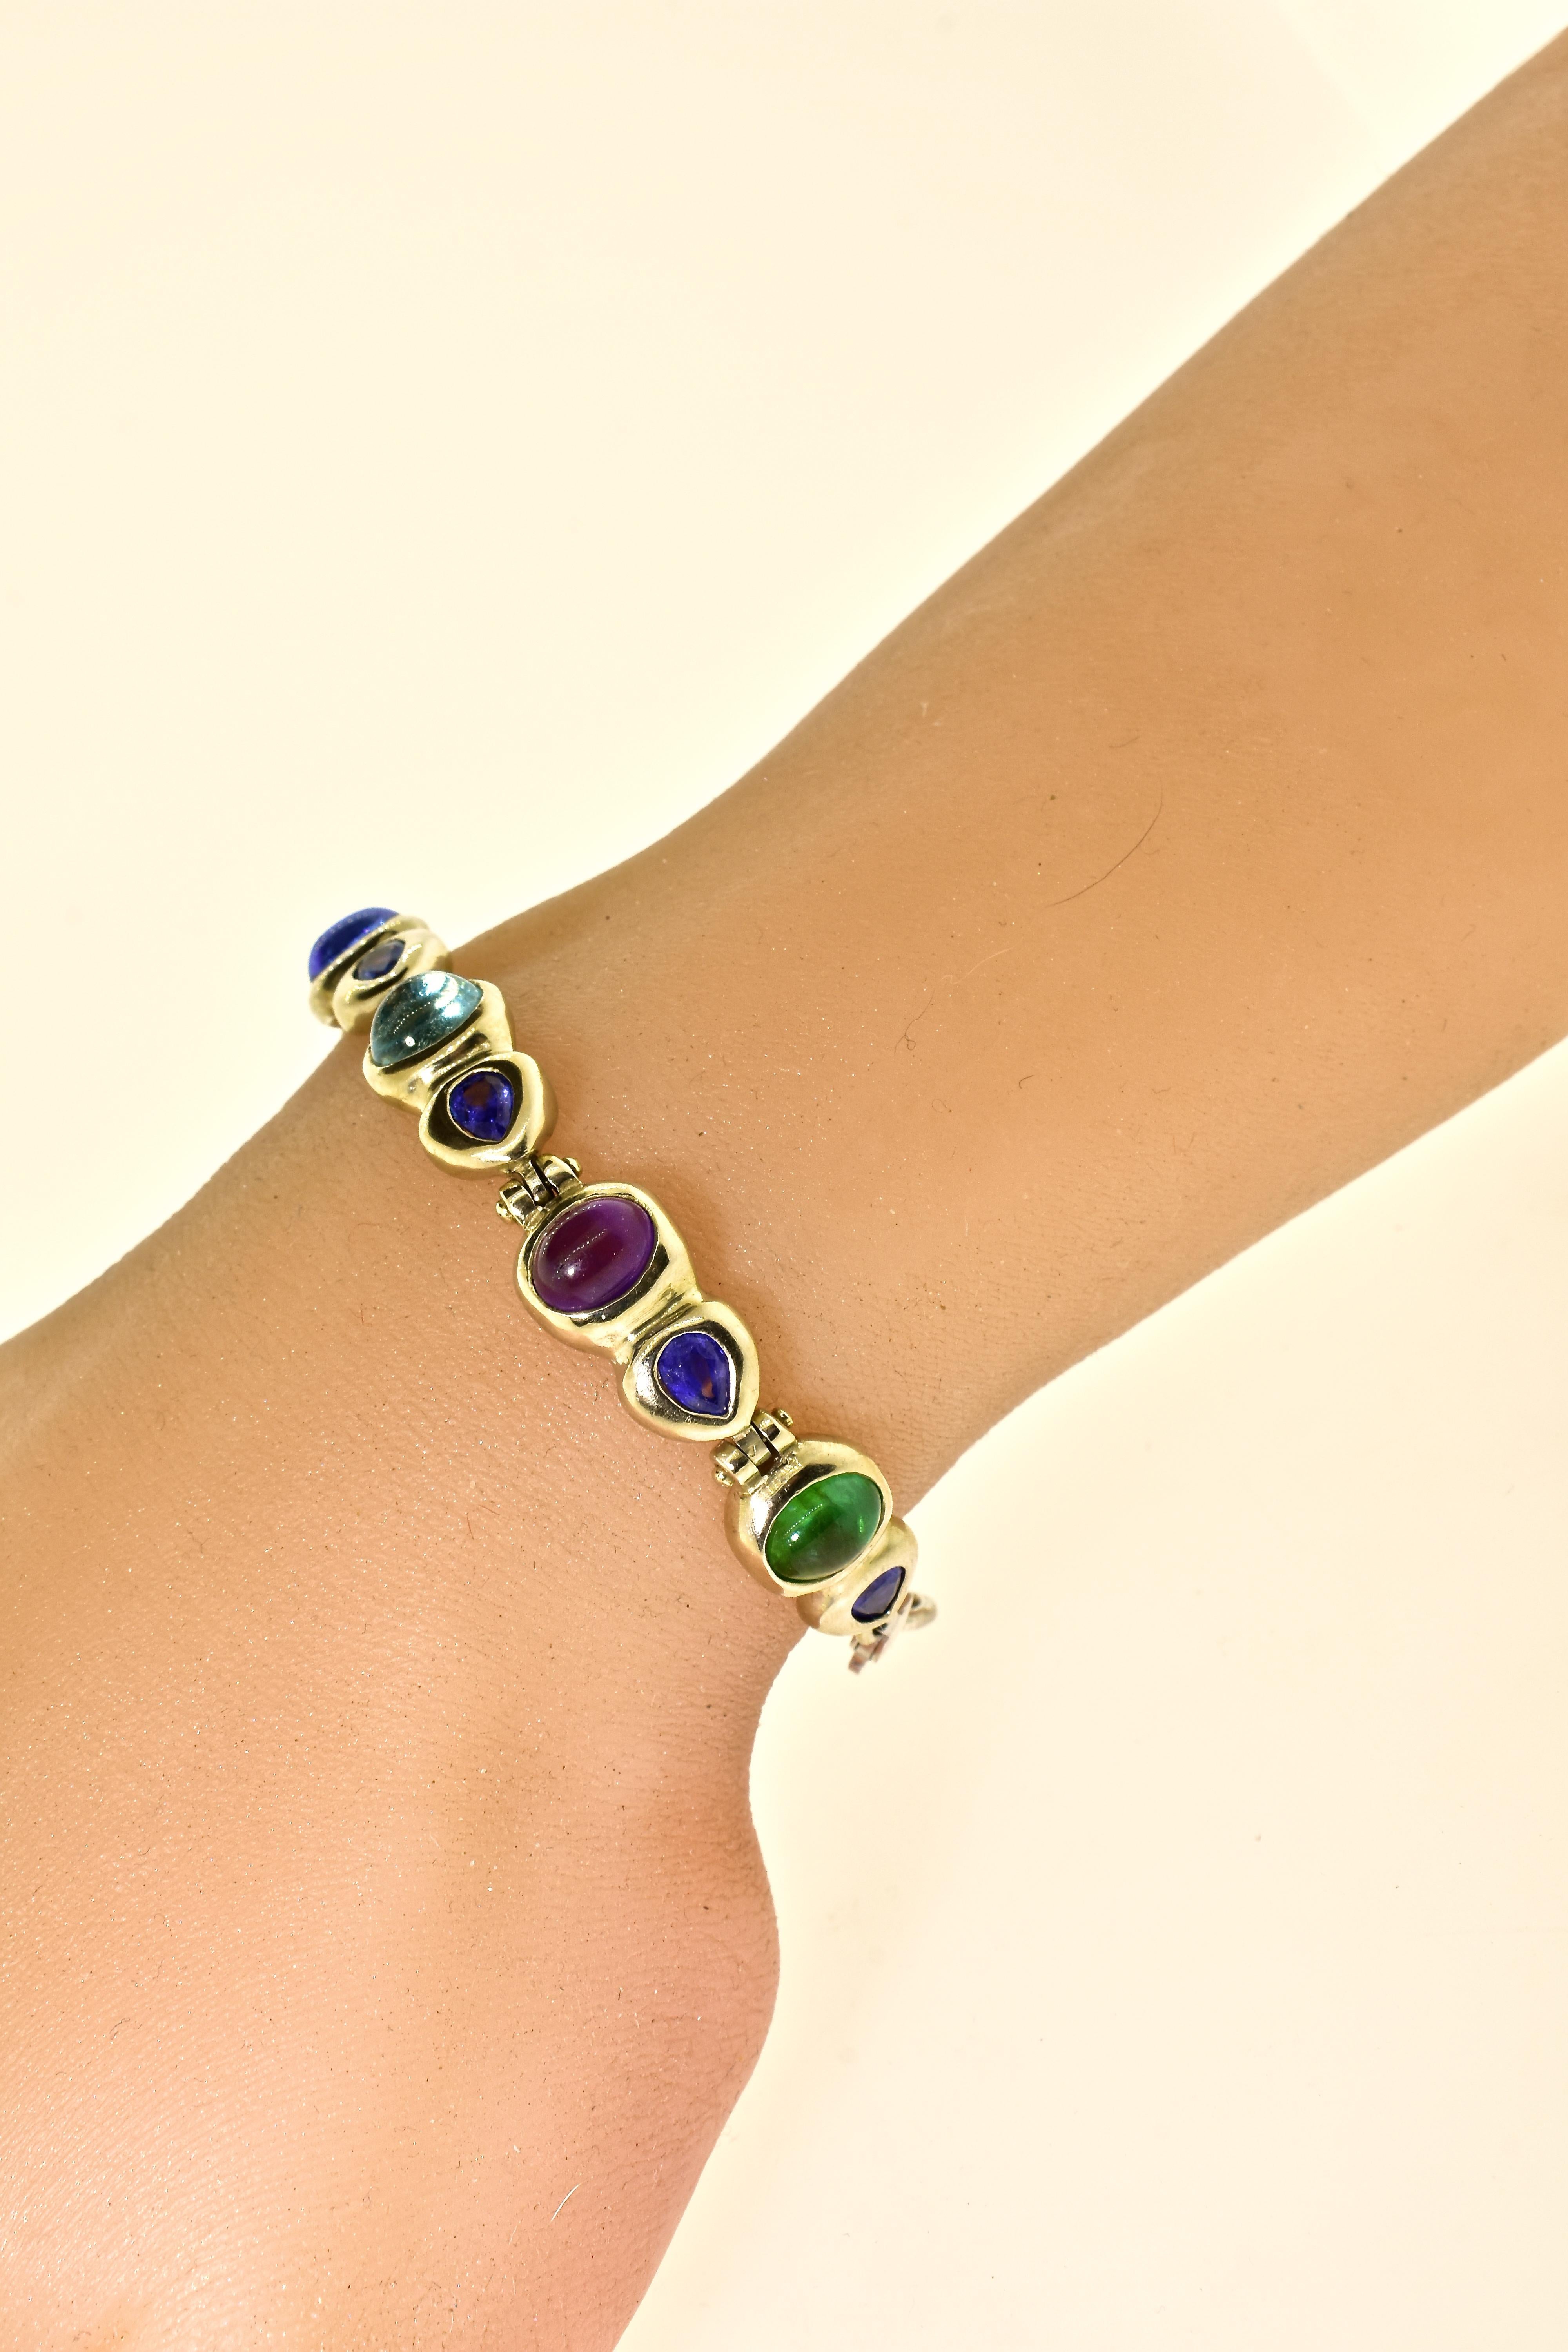 18K bracelet of contemporary design featuring 6 fine colored stones.  There are 2 fine emeralds, (4.1 cts.), 7 sapphires (2.9 cts.) a Rhodolite garnet (2.1 cts.) 2 Aquamarines (3.9 cts), and an amethyst (1.8 ct). All weights are estimated by our